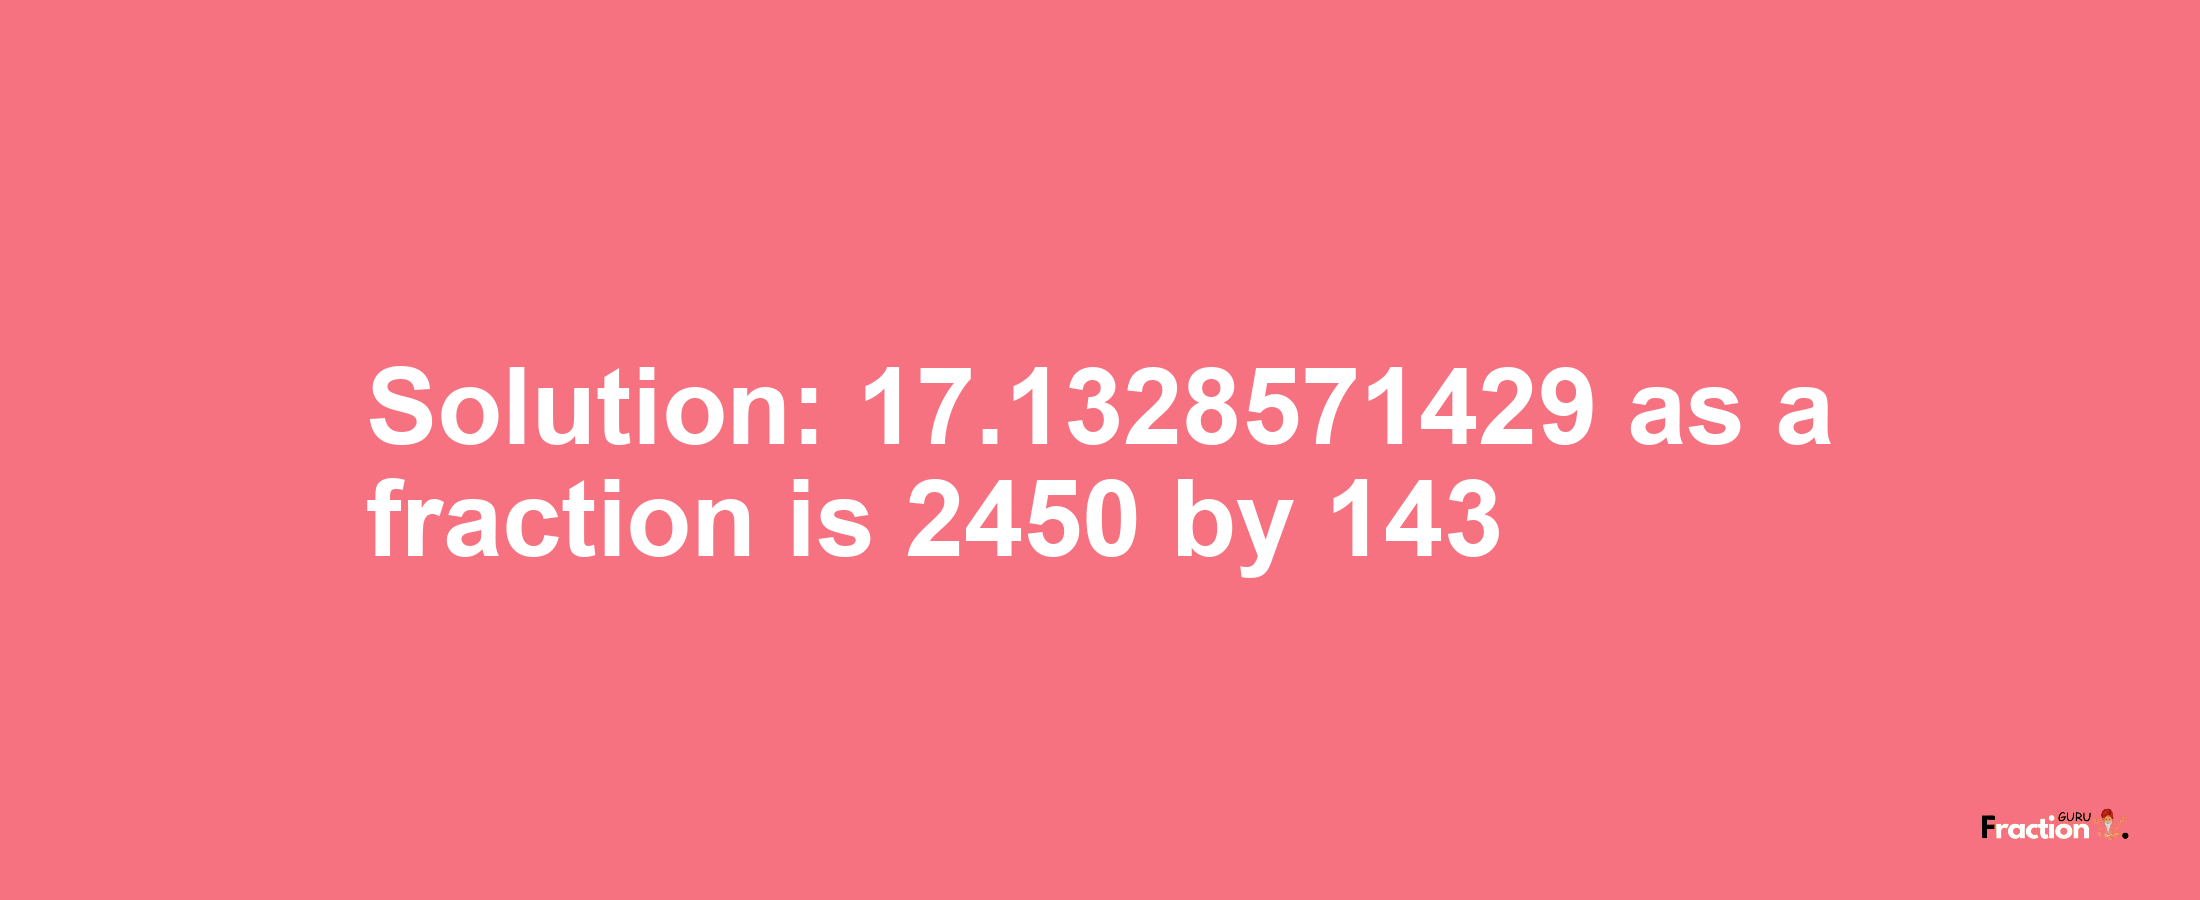 Solution:17.1328571429 as a fraction is 2450/143